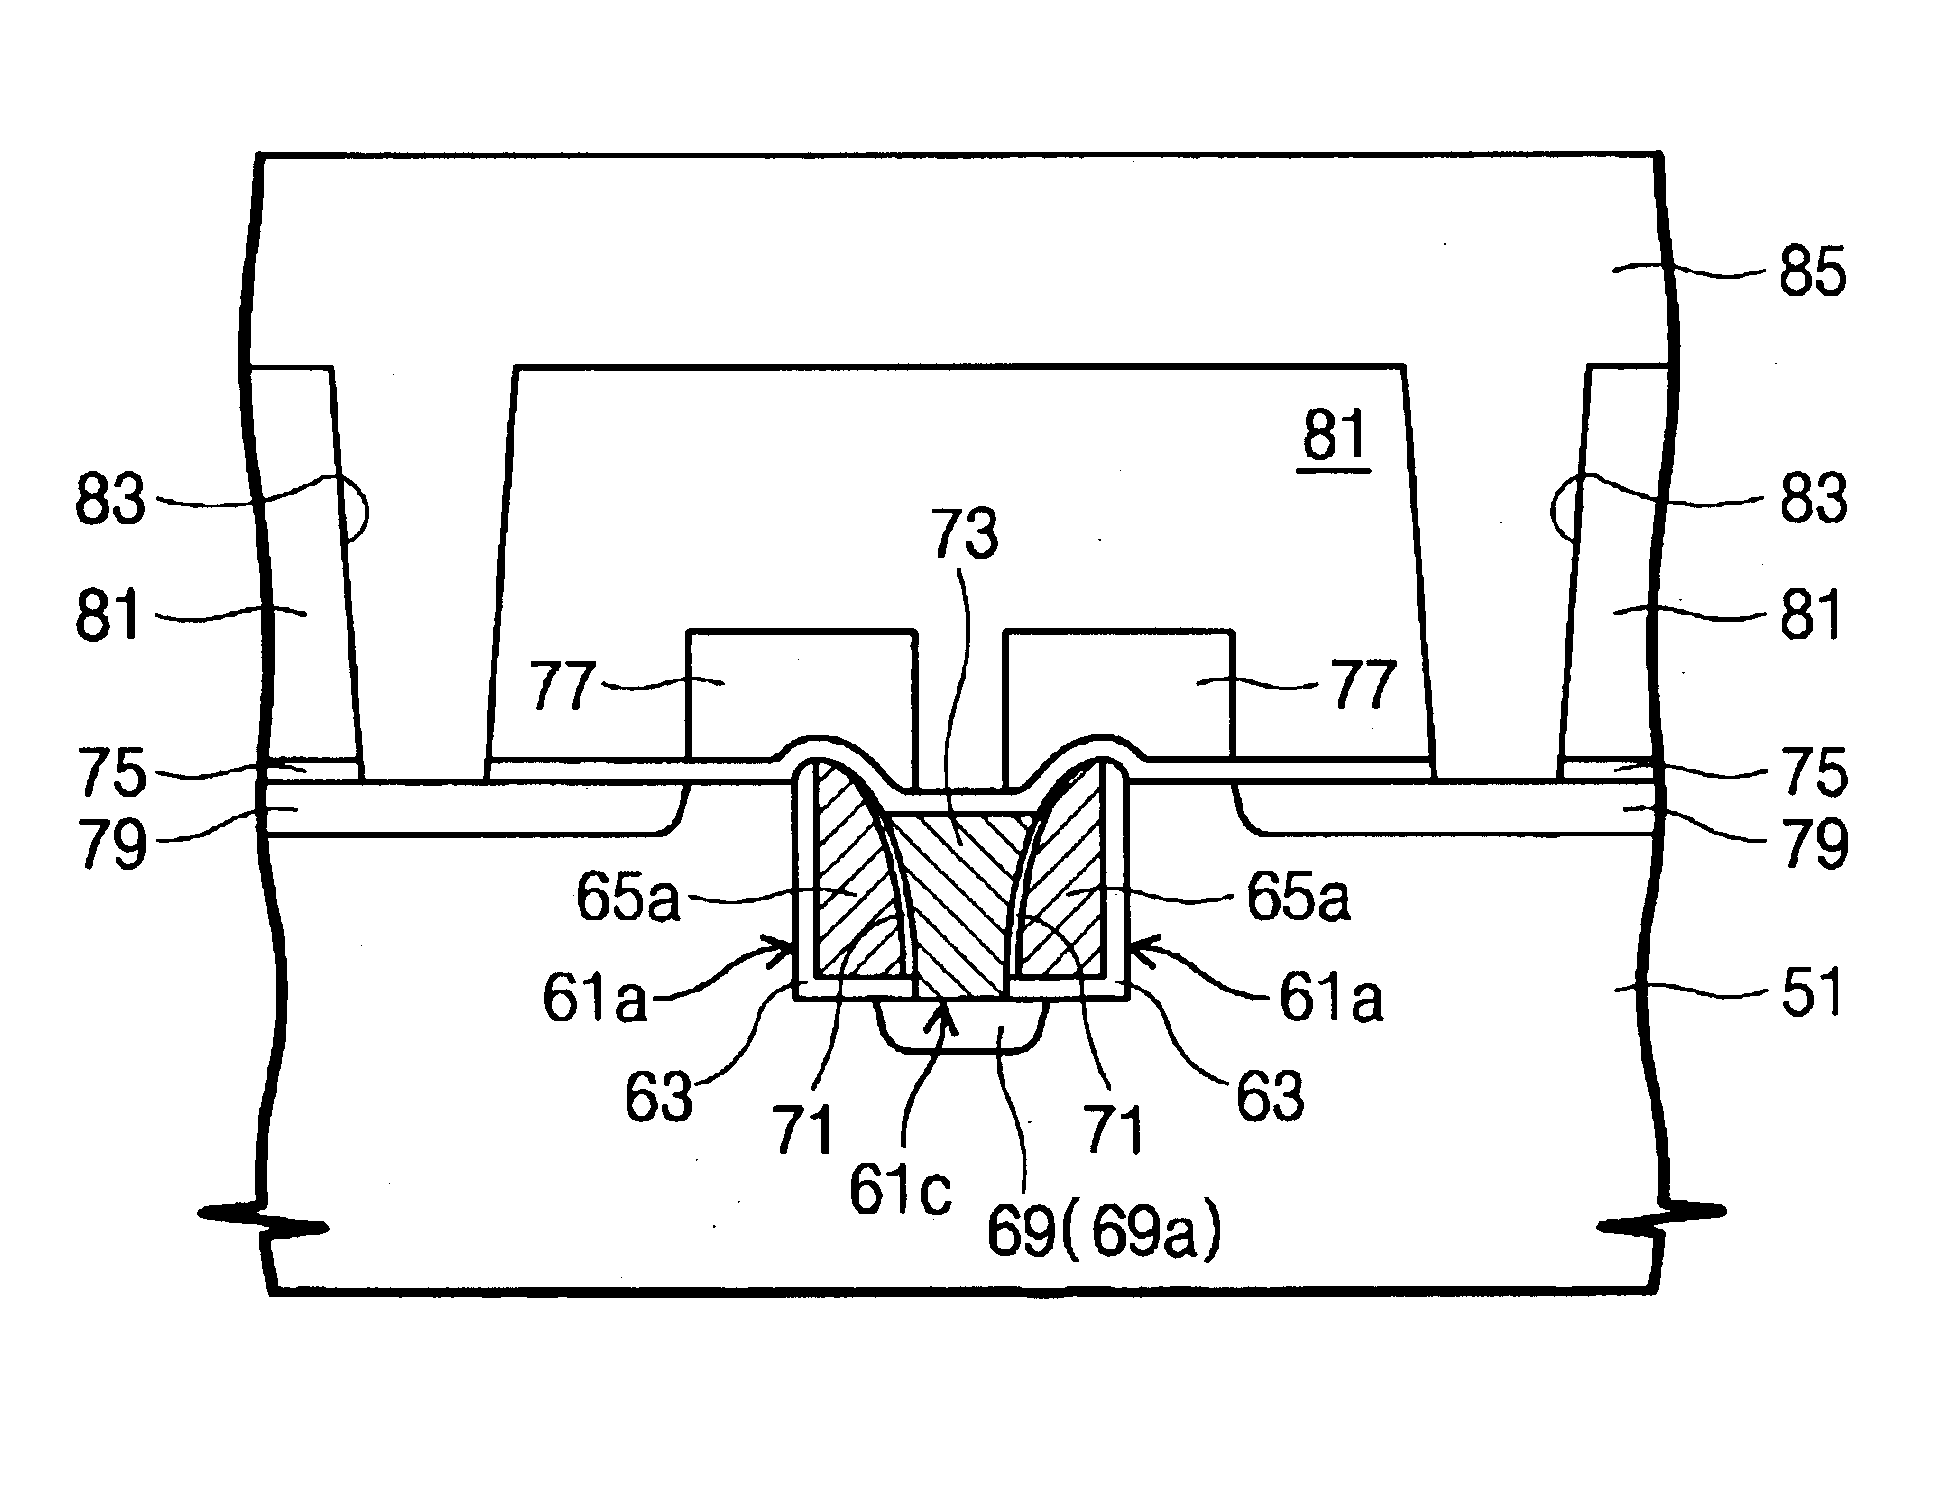 Nonvolatile memory cells having split gate structure and methods of fabricating the same